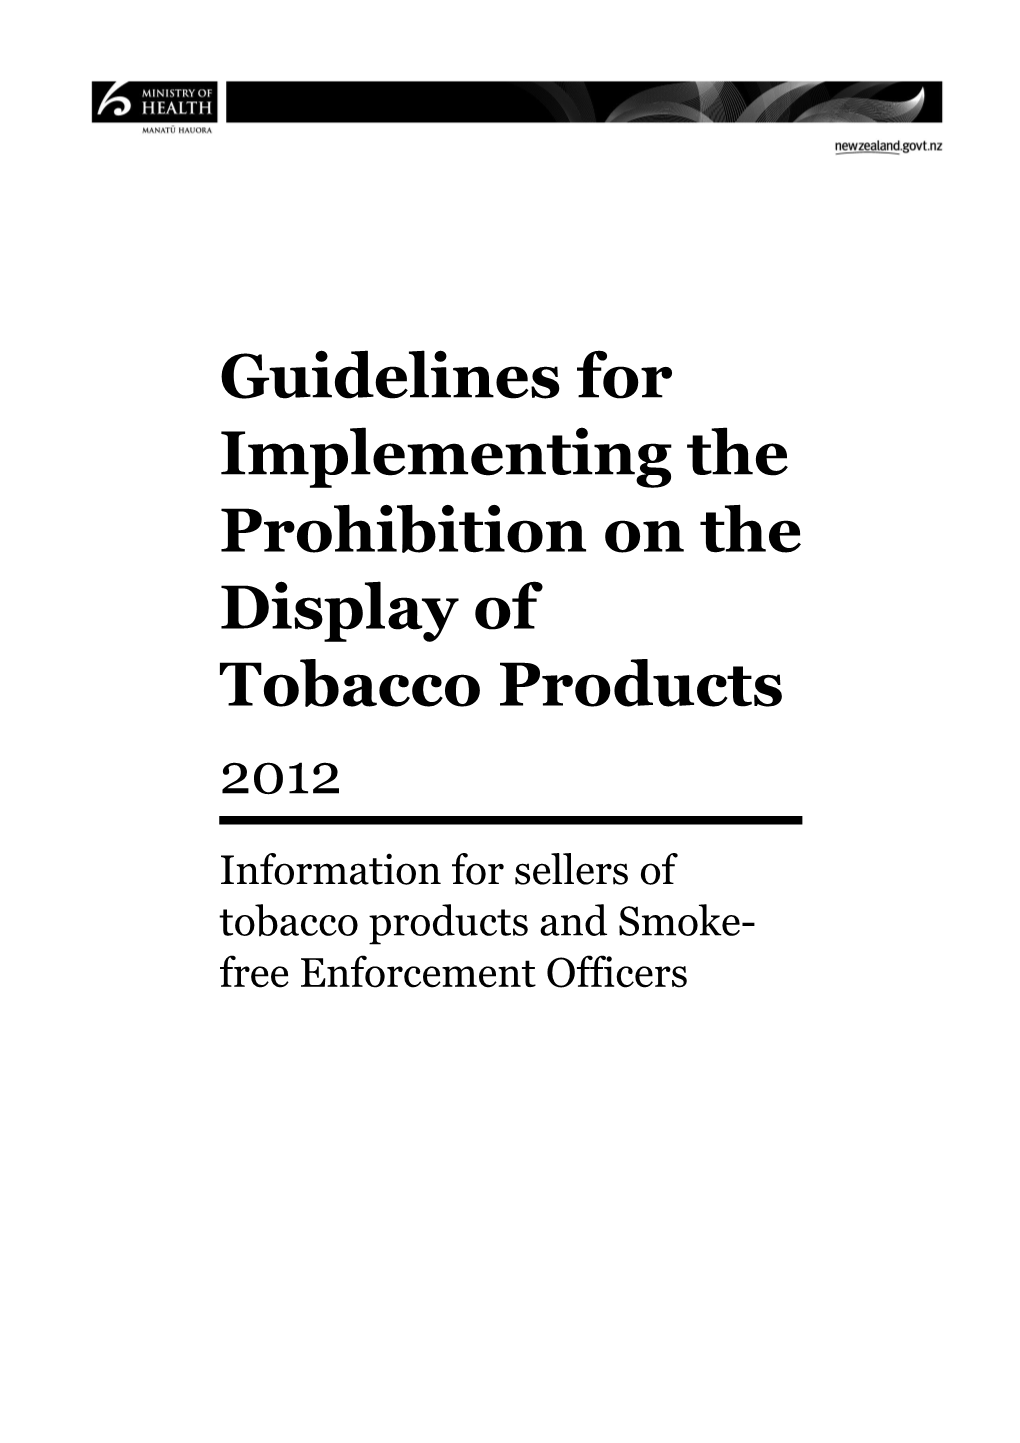 Guidelines for Implementing the Prohibition on the Display of Tobacco Products